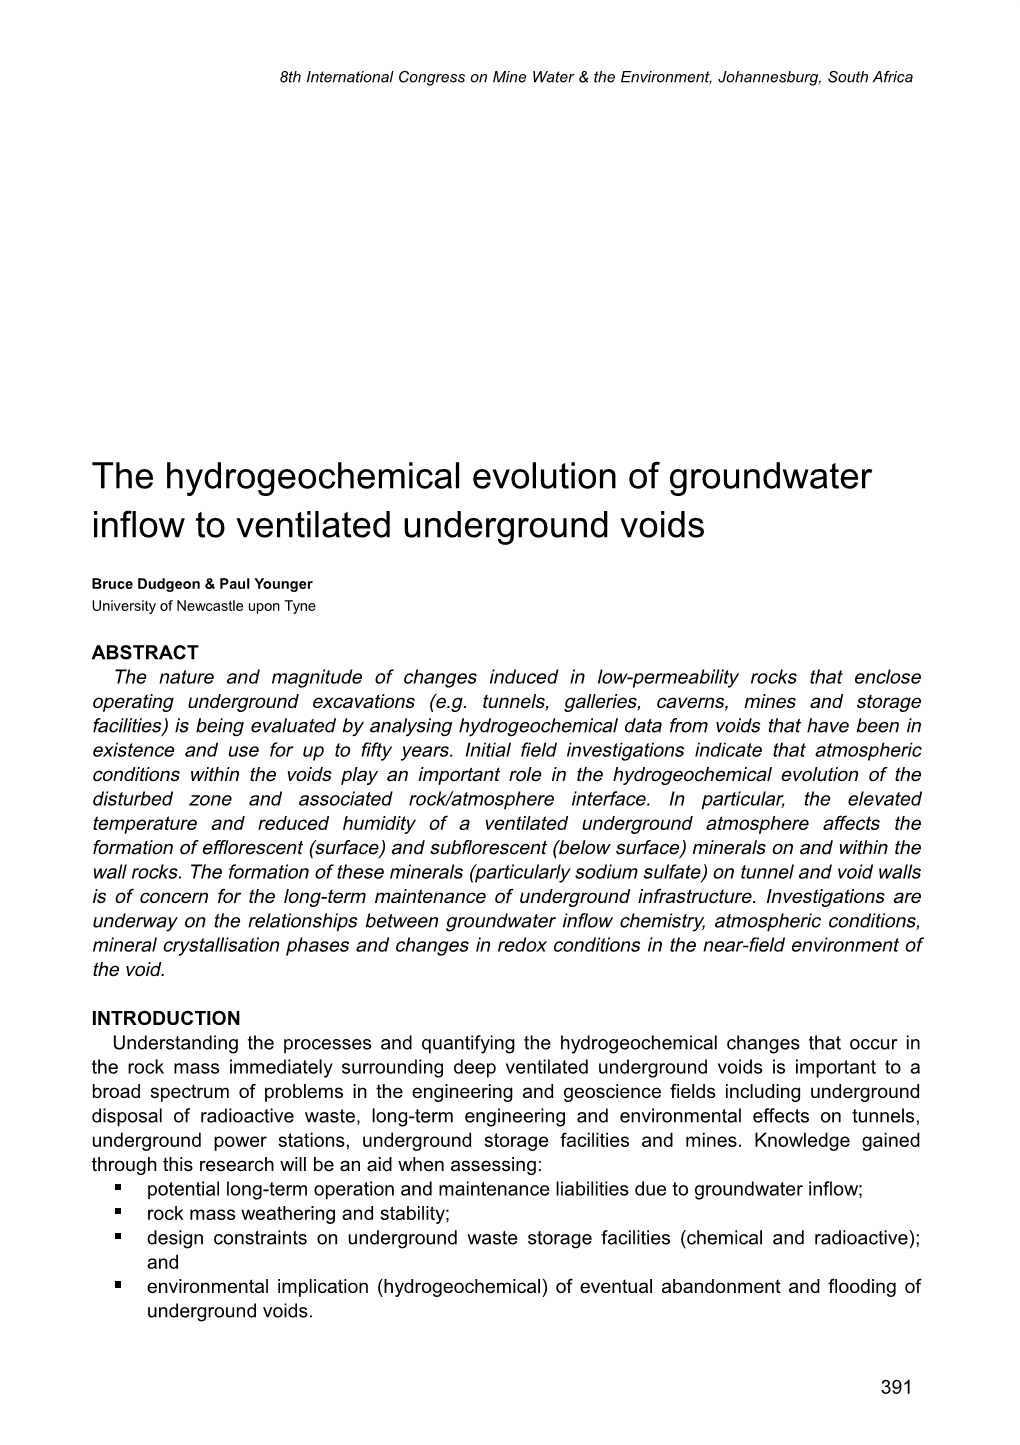 The Hydrogeochemical Evolution of Groundwater Inflow to Ventilated Underground Voids